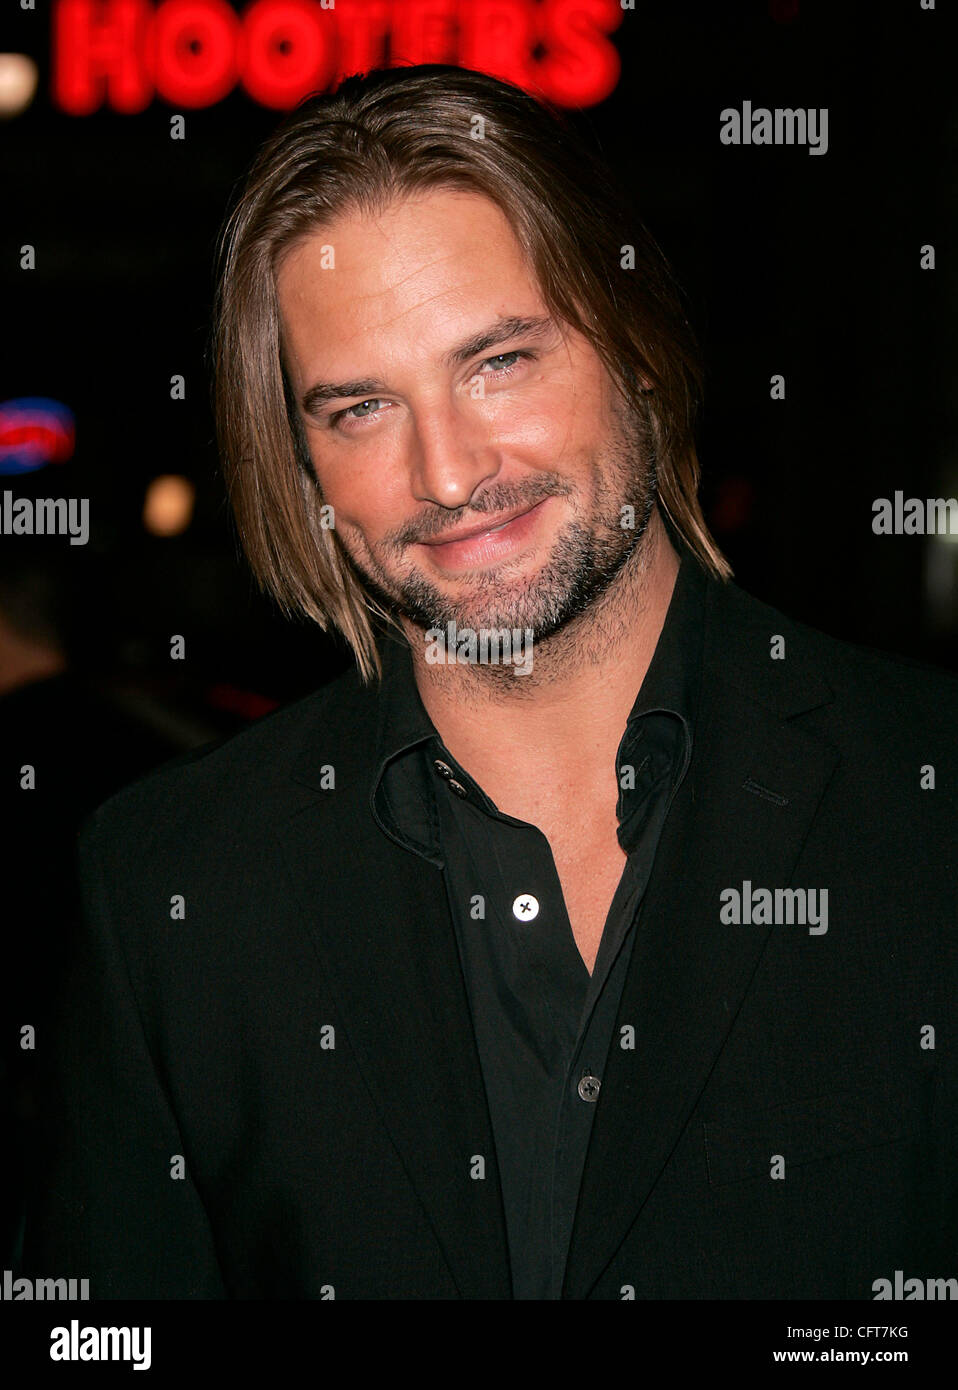 Dec 14, 2006; Hollywood, California, USA; Actor JOSH HOLLOWAY arrives at the 'We Are Marshall' Los Angeles Premiere held at the Mann Chinese Theatre. Mandatory Credit: Photo by Lisa O'Connor/ZUMA Press. (©) Copyright 2006 by Lisa O'Connor Stock Photo